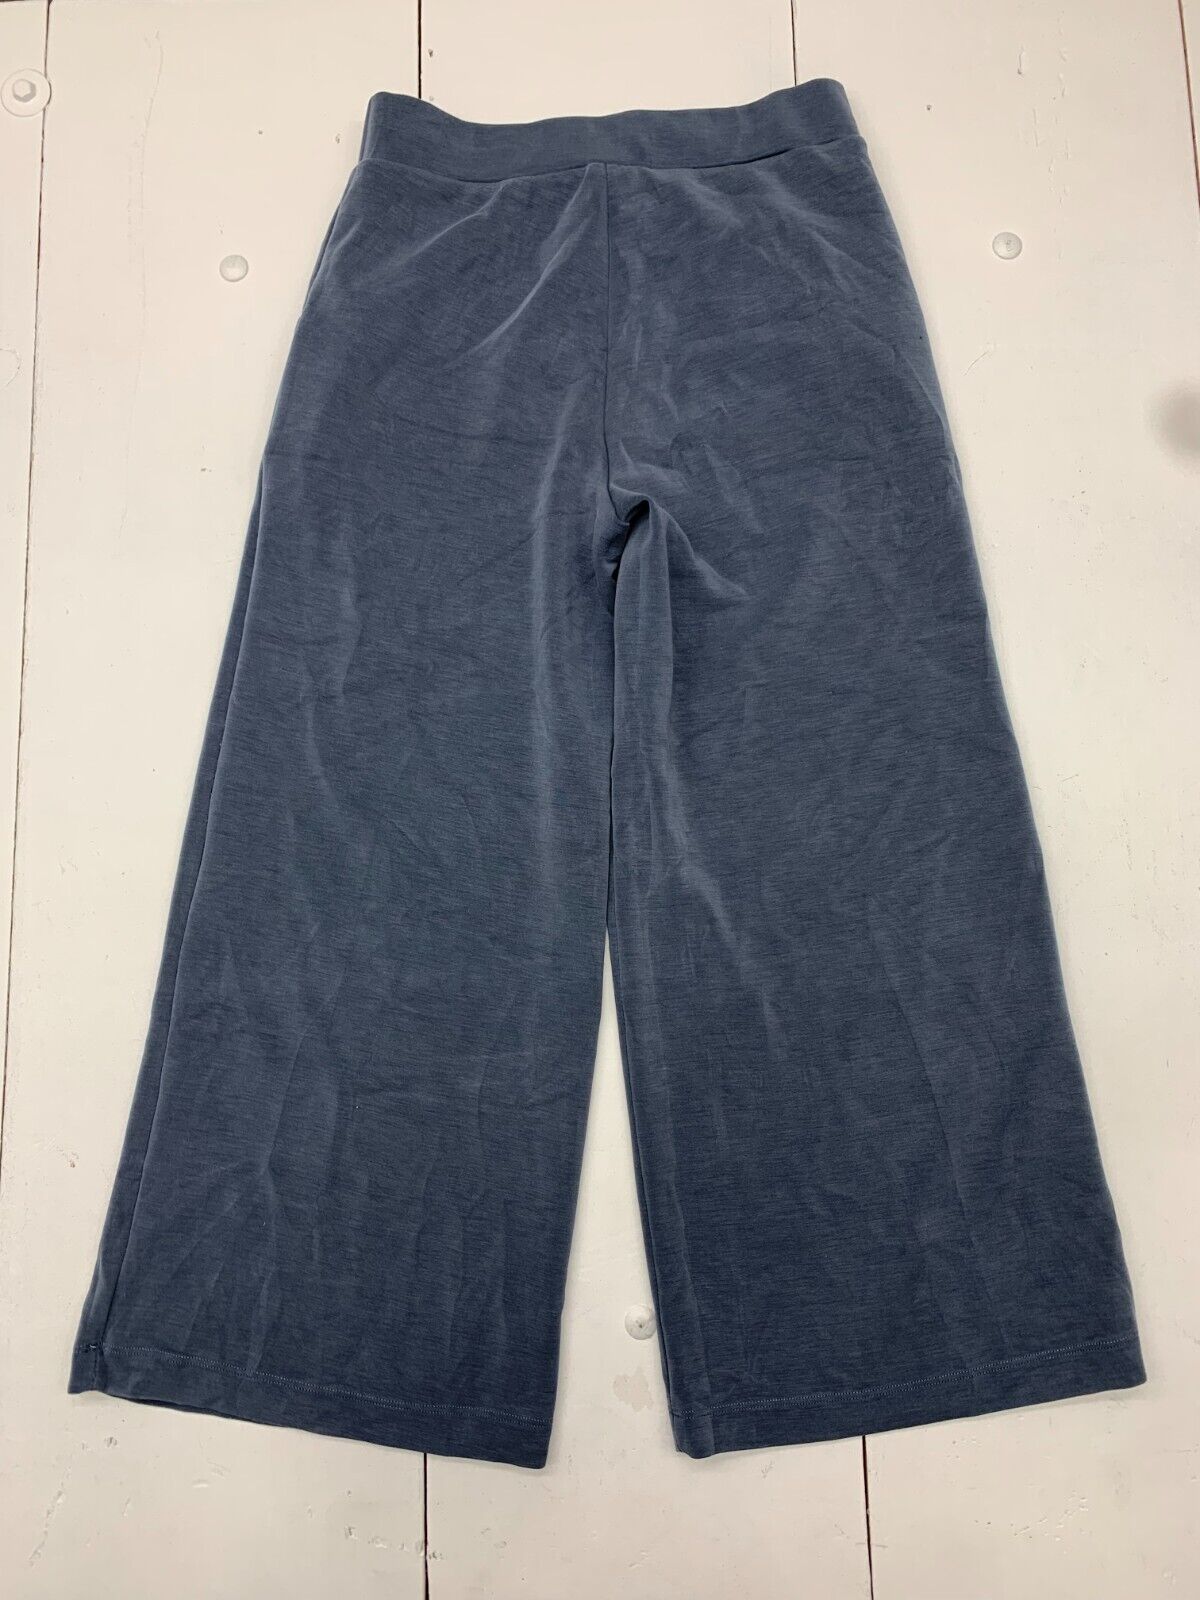 Cable & Gauge Sport Womens Blue/Gray Sweatpants Size Small - beyond exchange